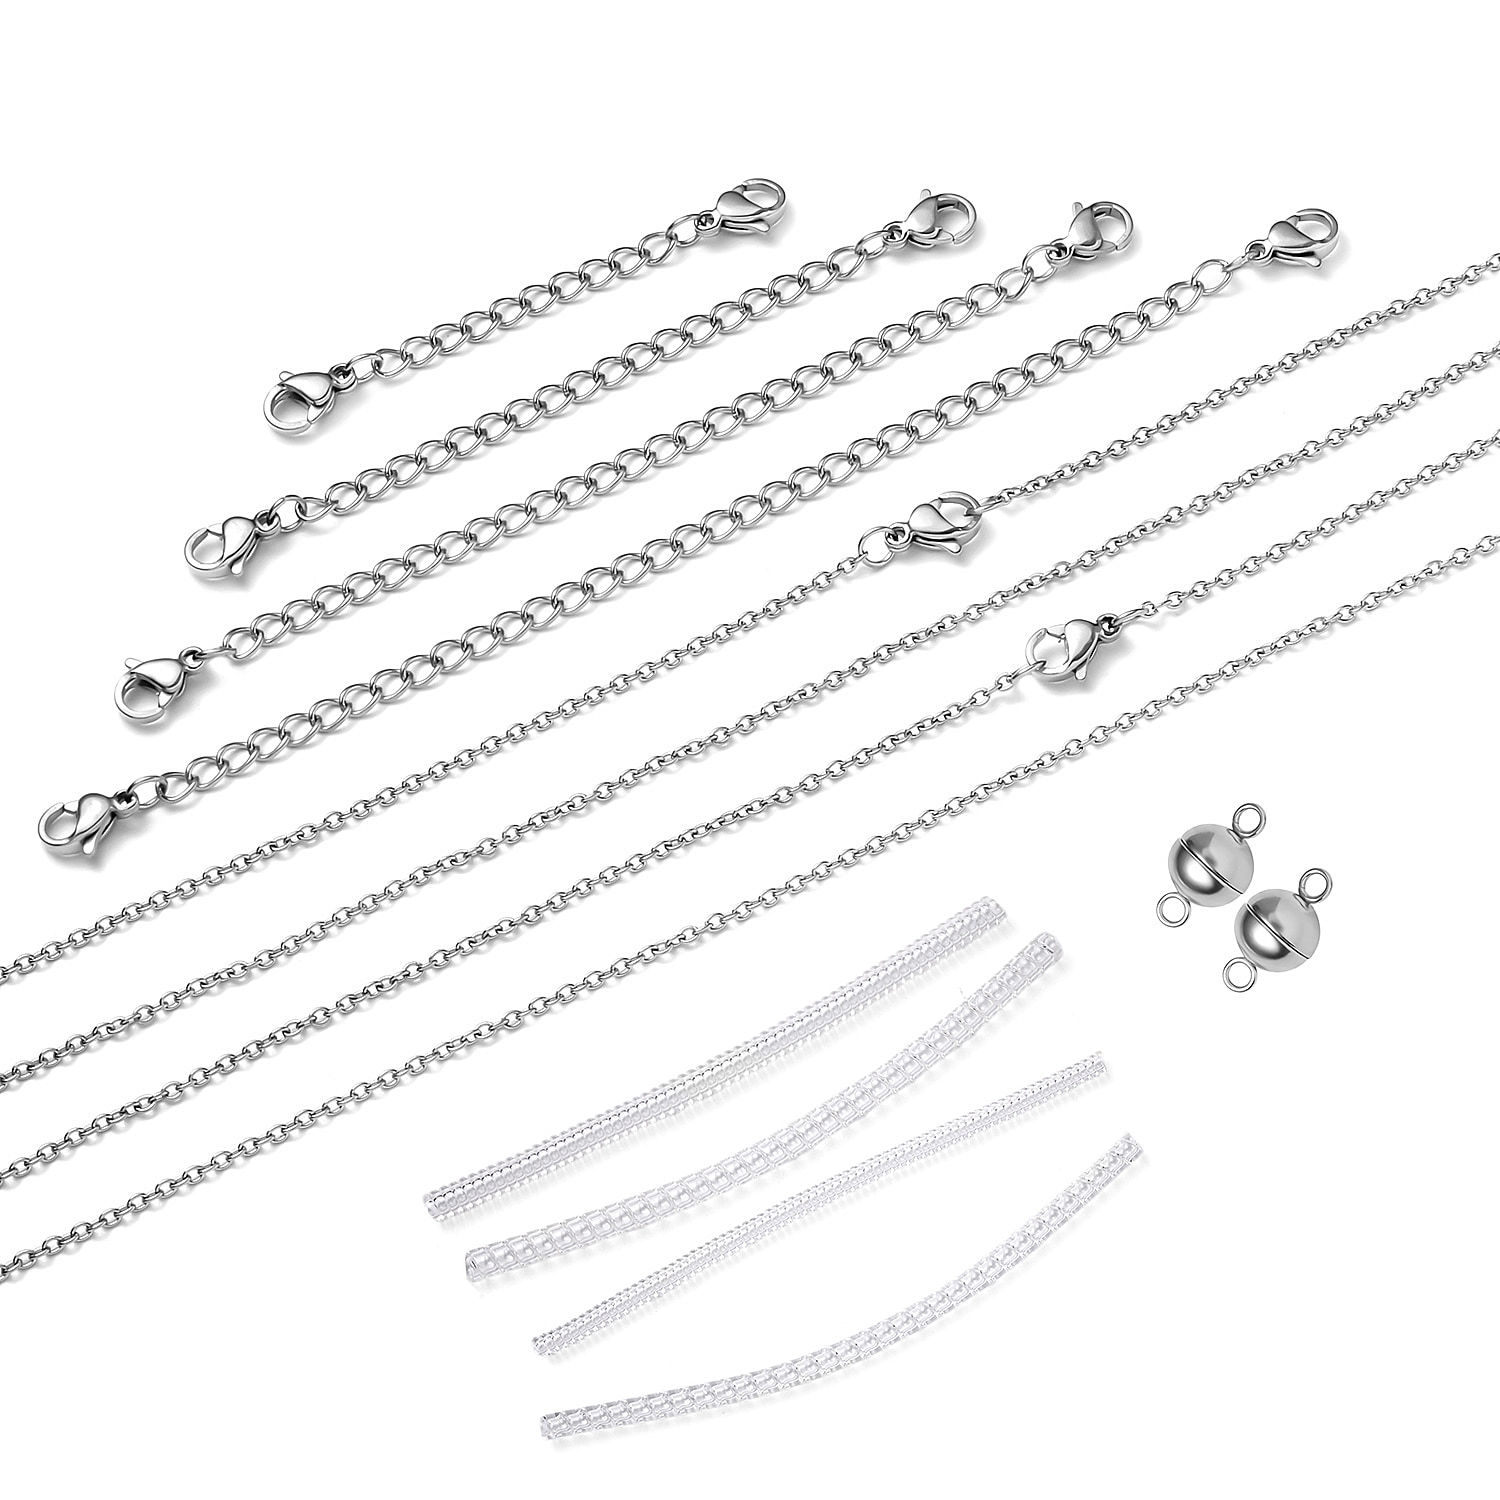 Jewellery Essential Kit - with 2 X Magnetic Lock and 4 X Extenders and 4 X Ring Resizers - Silver Plated